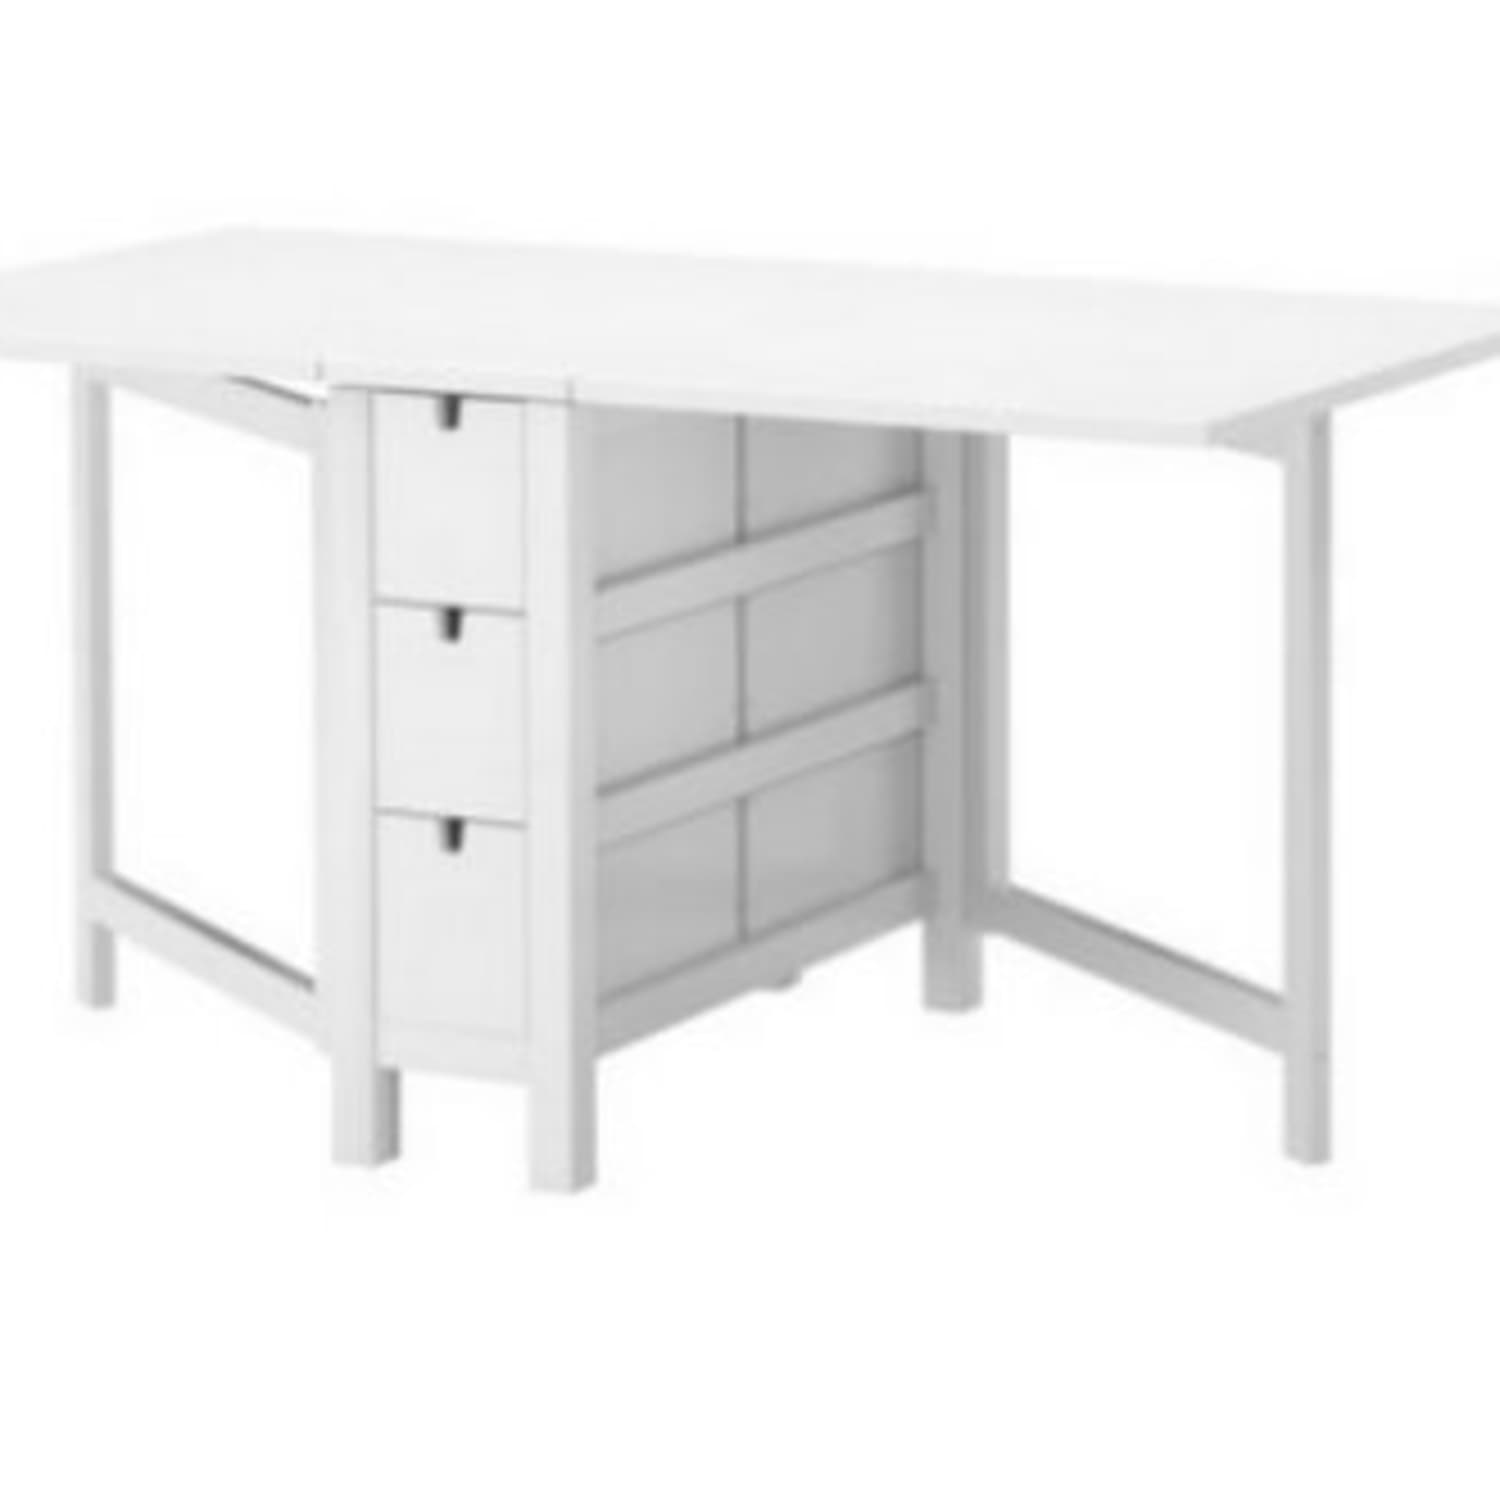 Before & After: IKEA Norden Table To Portable Dressmaking Station